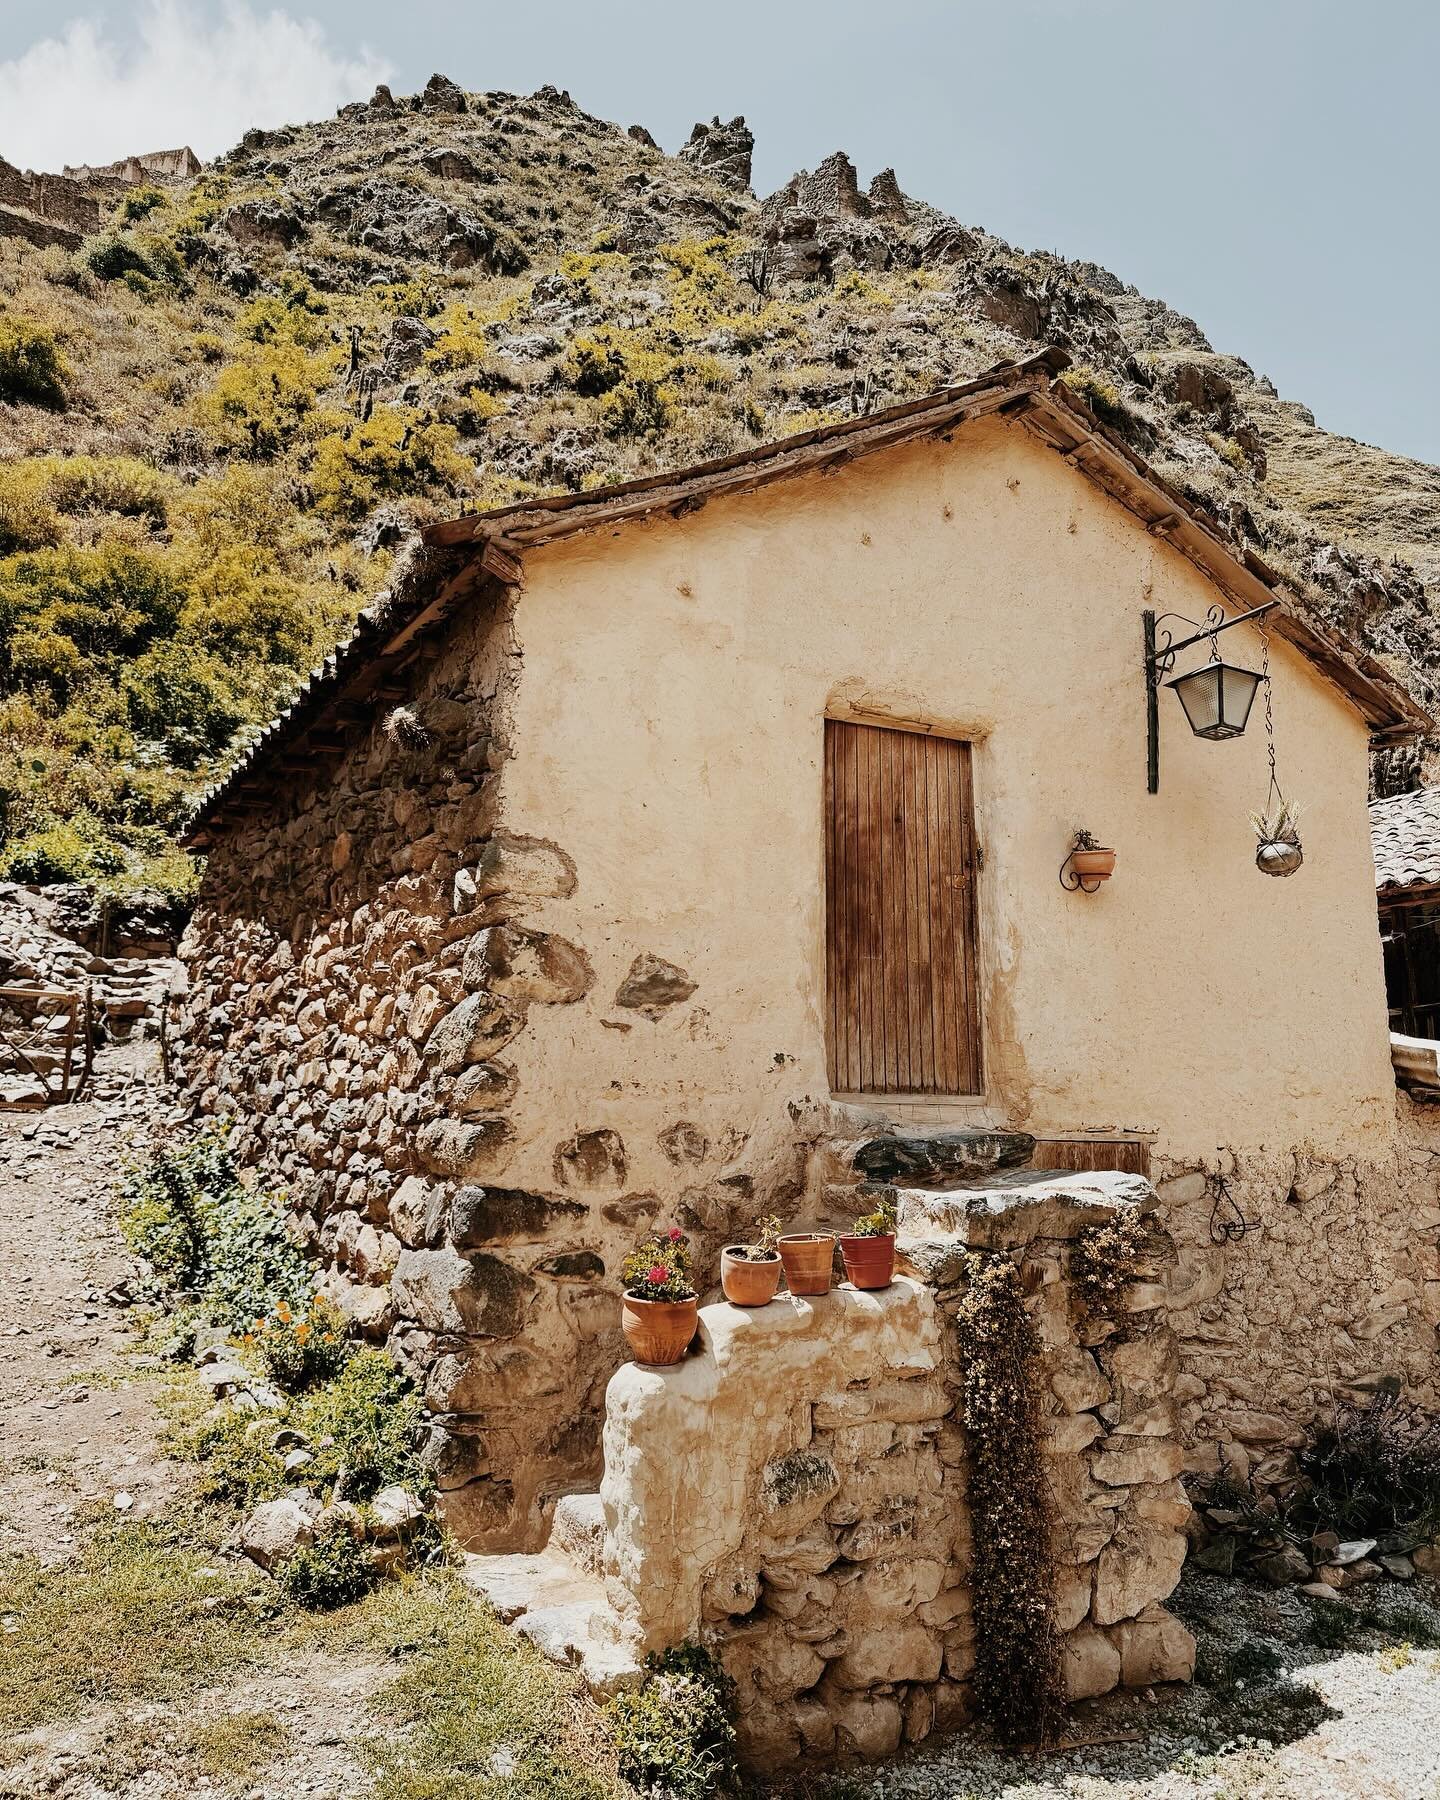 Will travel to the ends of the earth to stay in charming dwellings such as this: a two hundred year old corn drying atroje turned cottage nestled at the base of the sacred Apu Pinkuylluna mountains with Inkan ruins rising up behind. New world and old